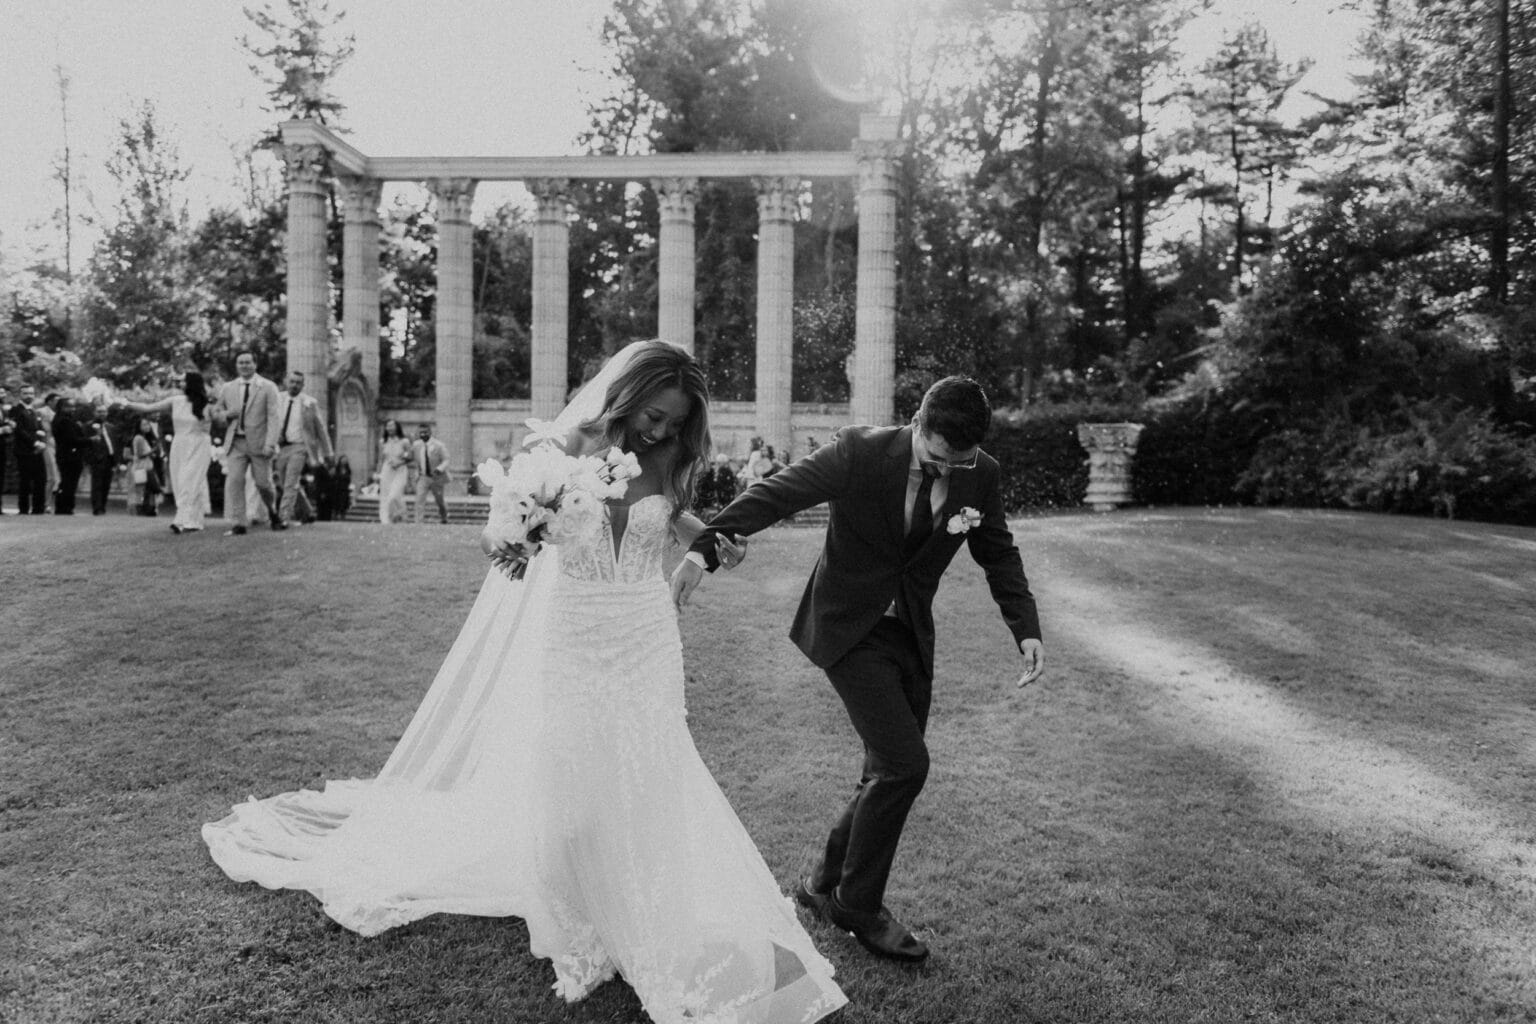 Black and white candid photo of couple exciting the ceremony.